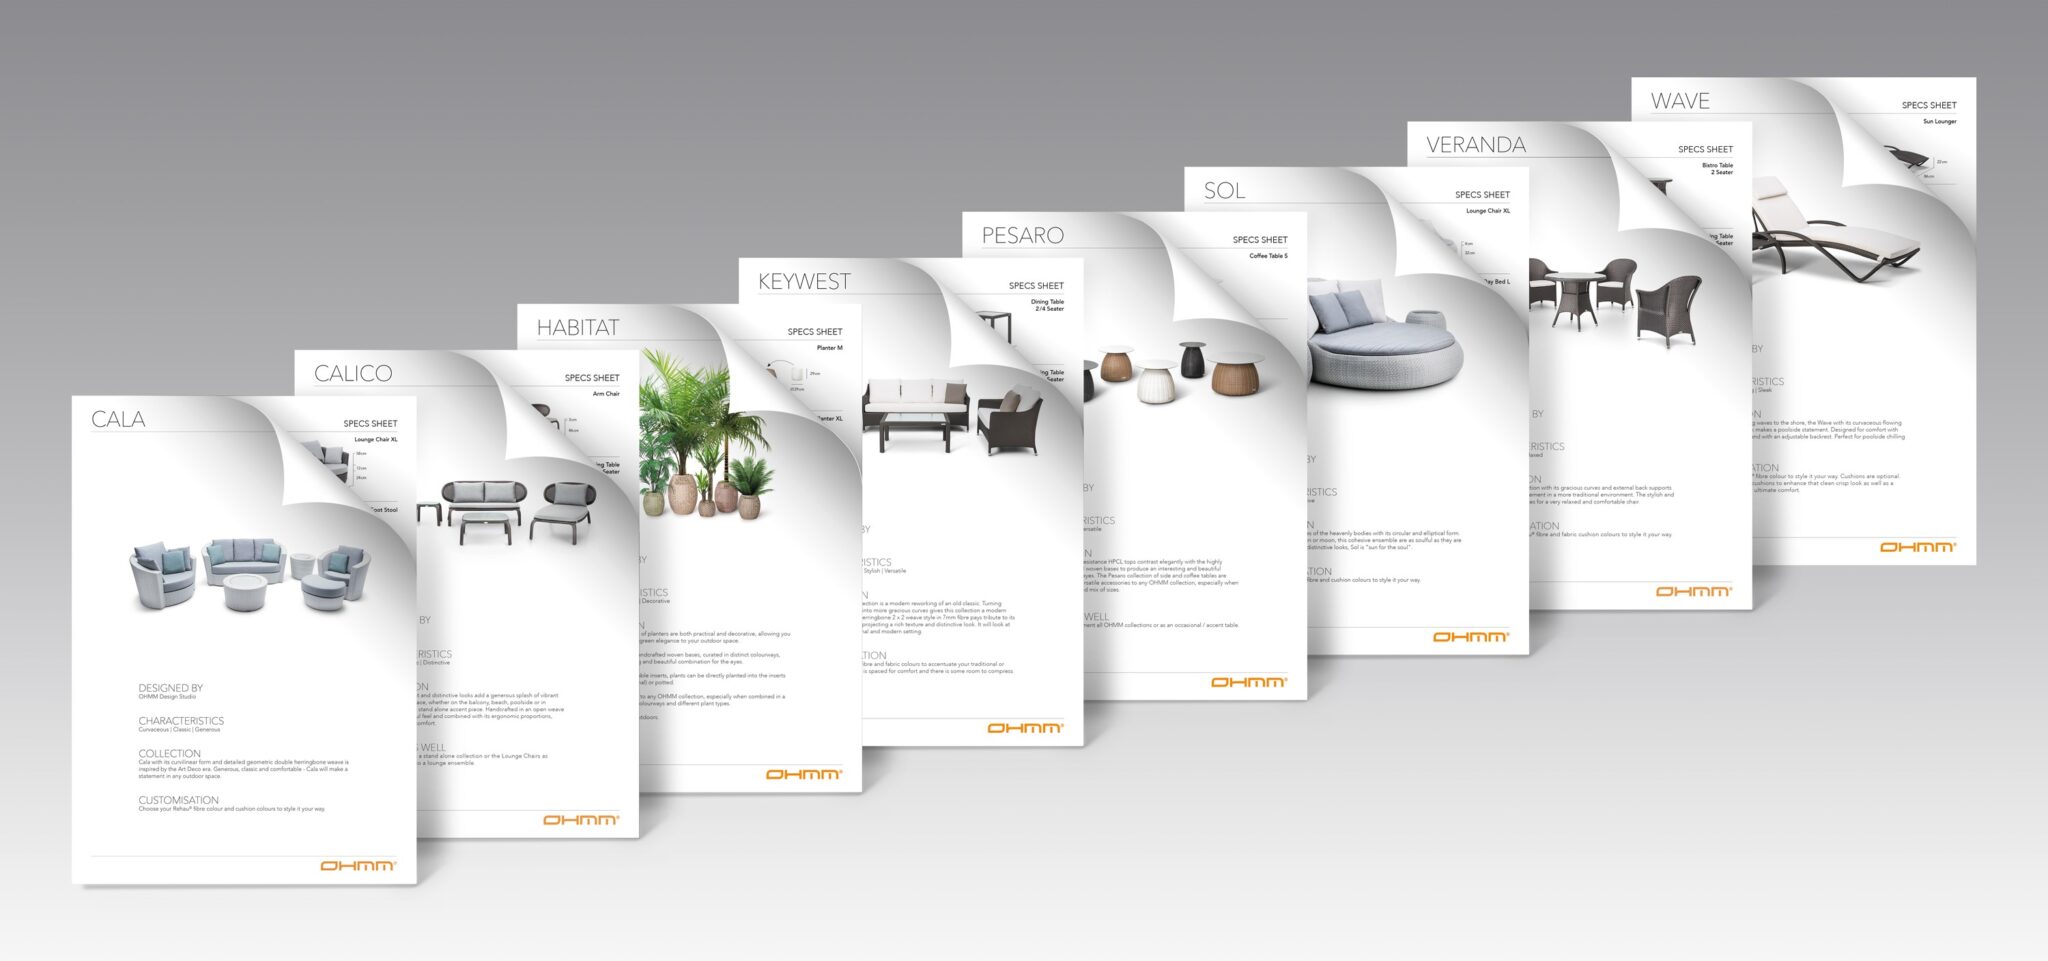 ohmm-commerical-outdoor-furniture-collections-spec-sheets